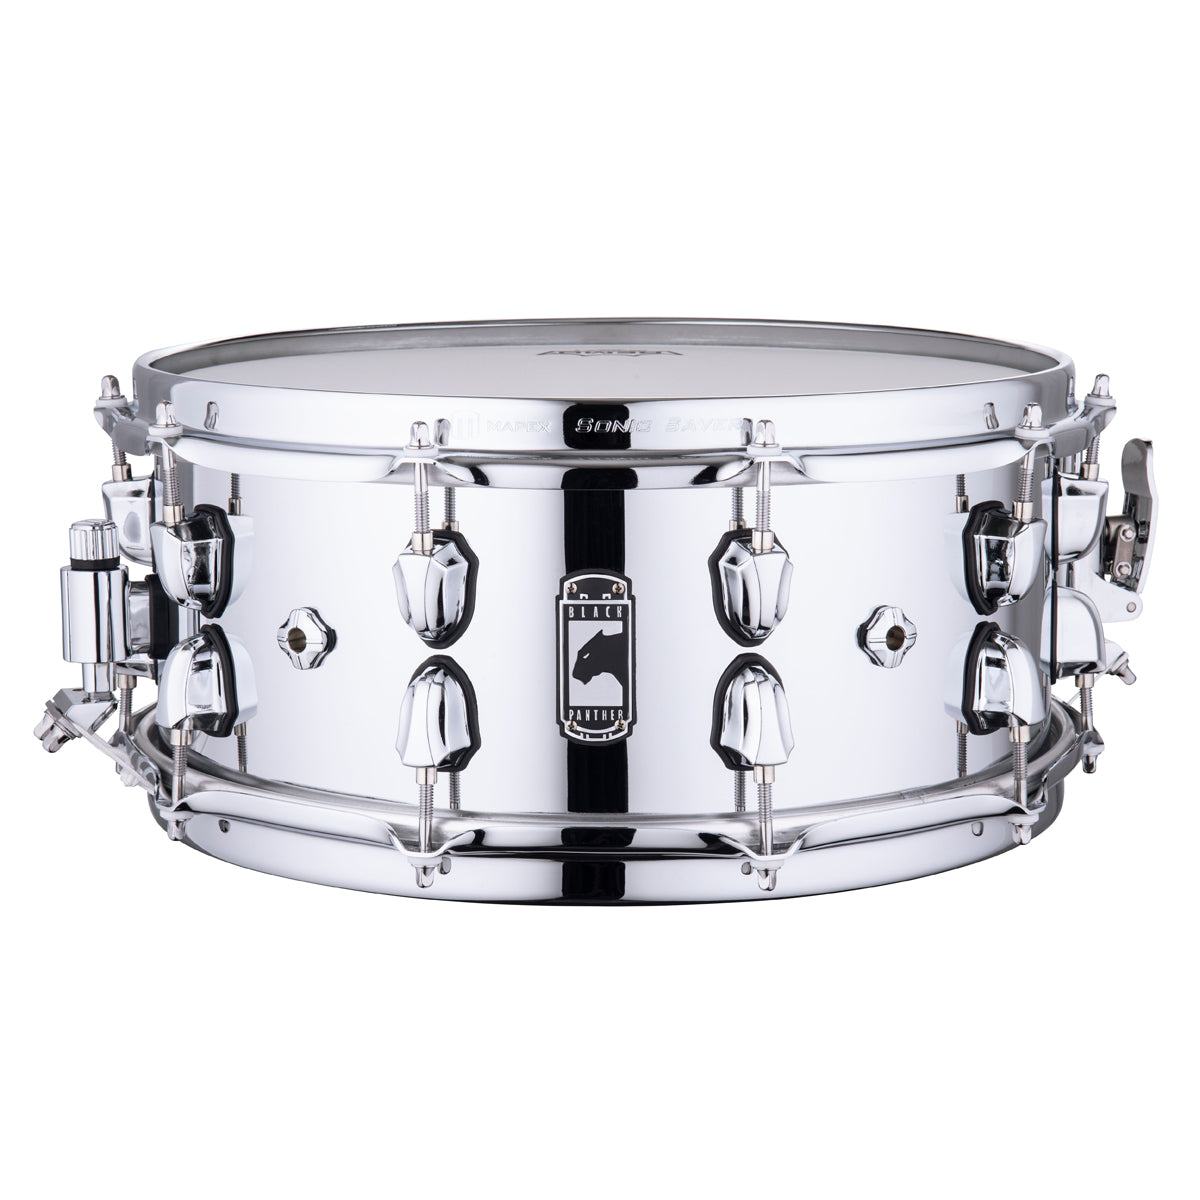 Mapex Black Panther 14" x 6" 'Cyrus' Steel Snare